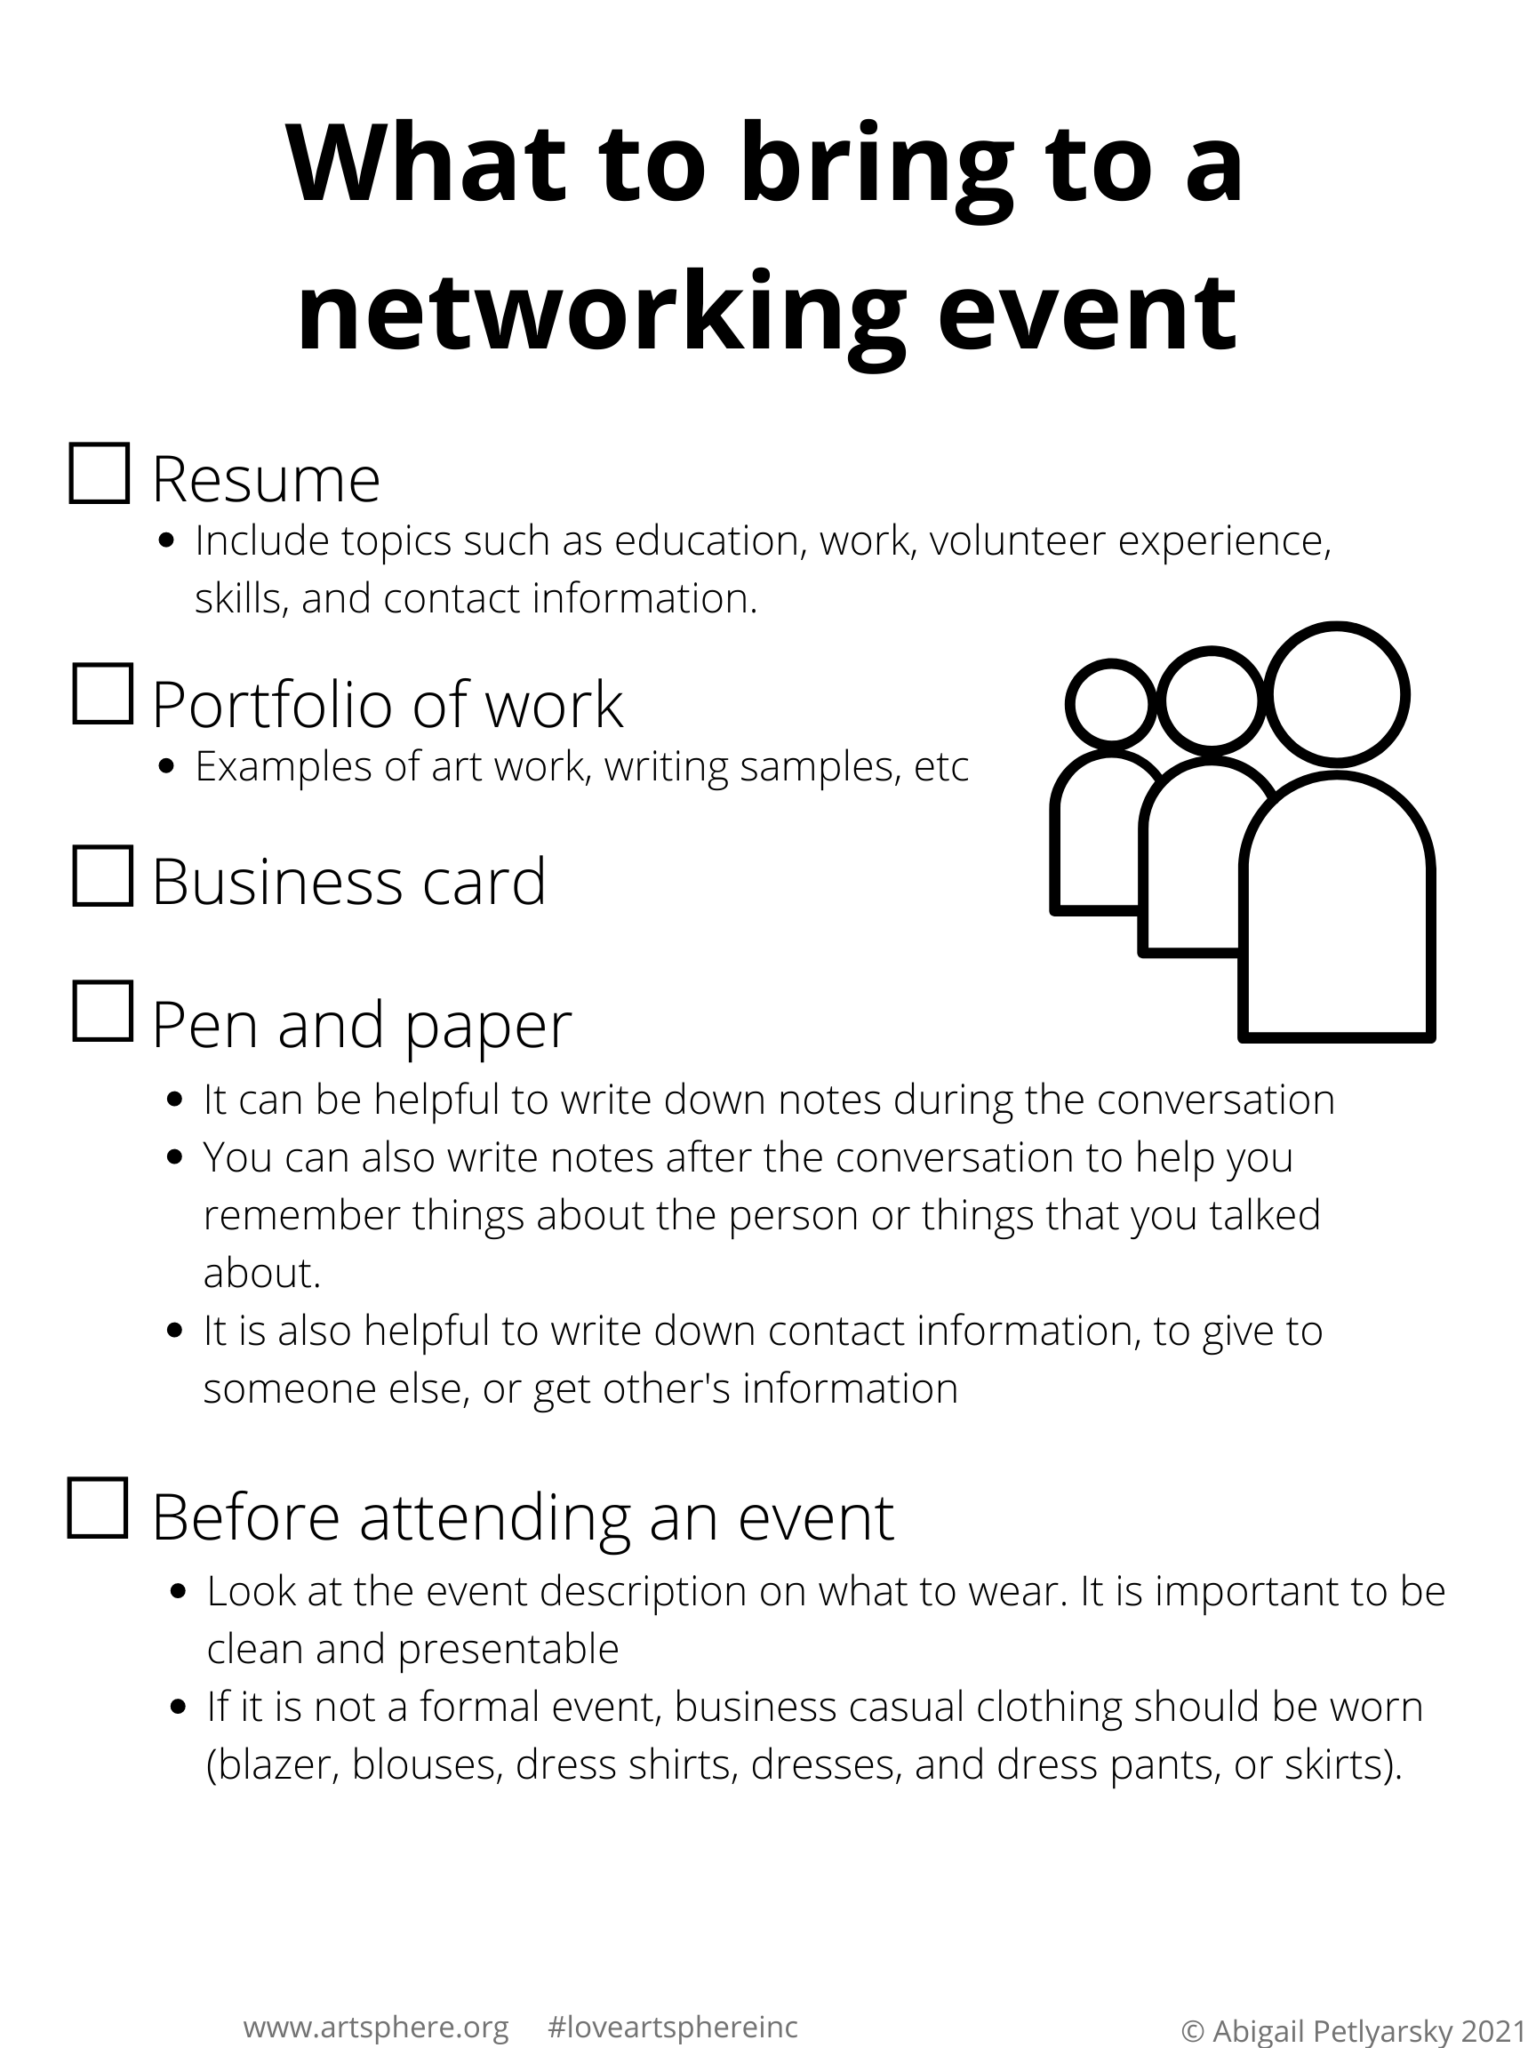 what-to-bring-to-a-networking-event-art-sphere-inc